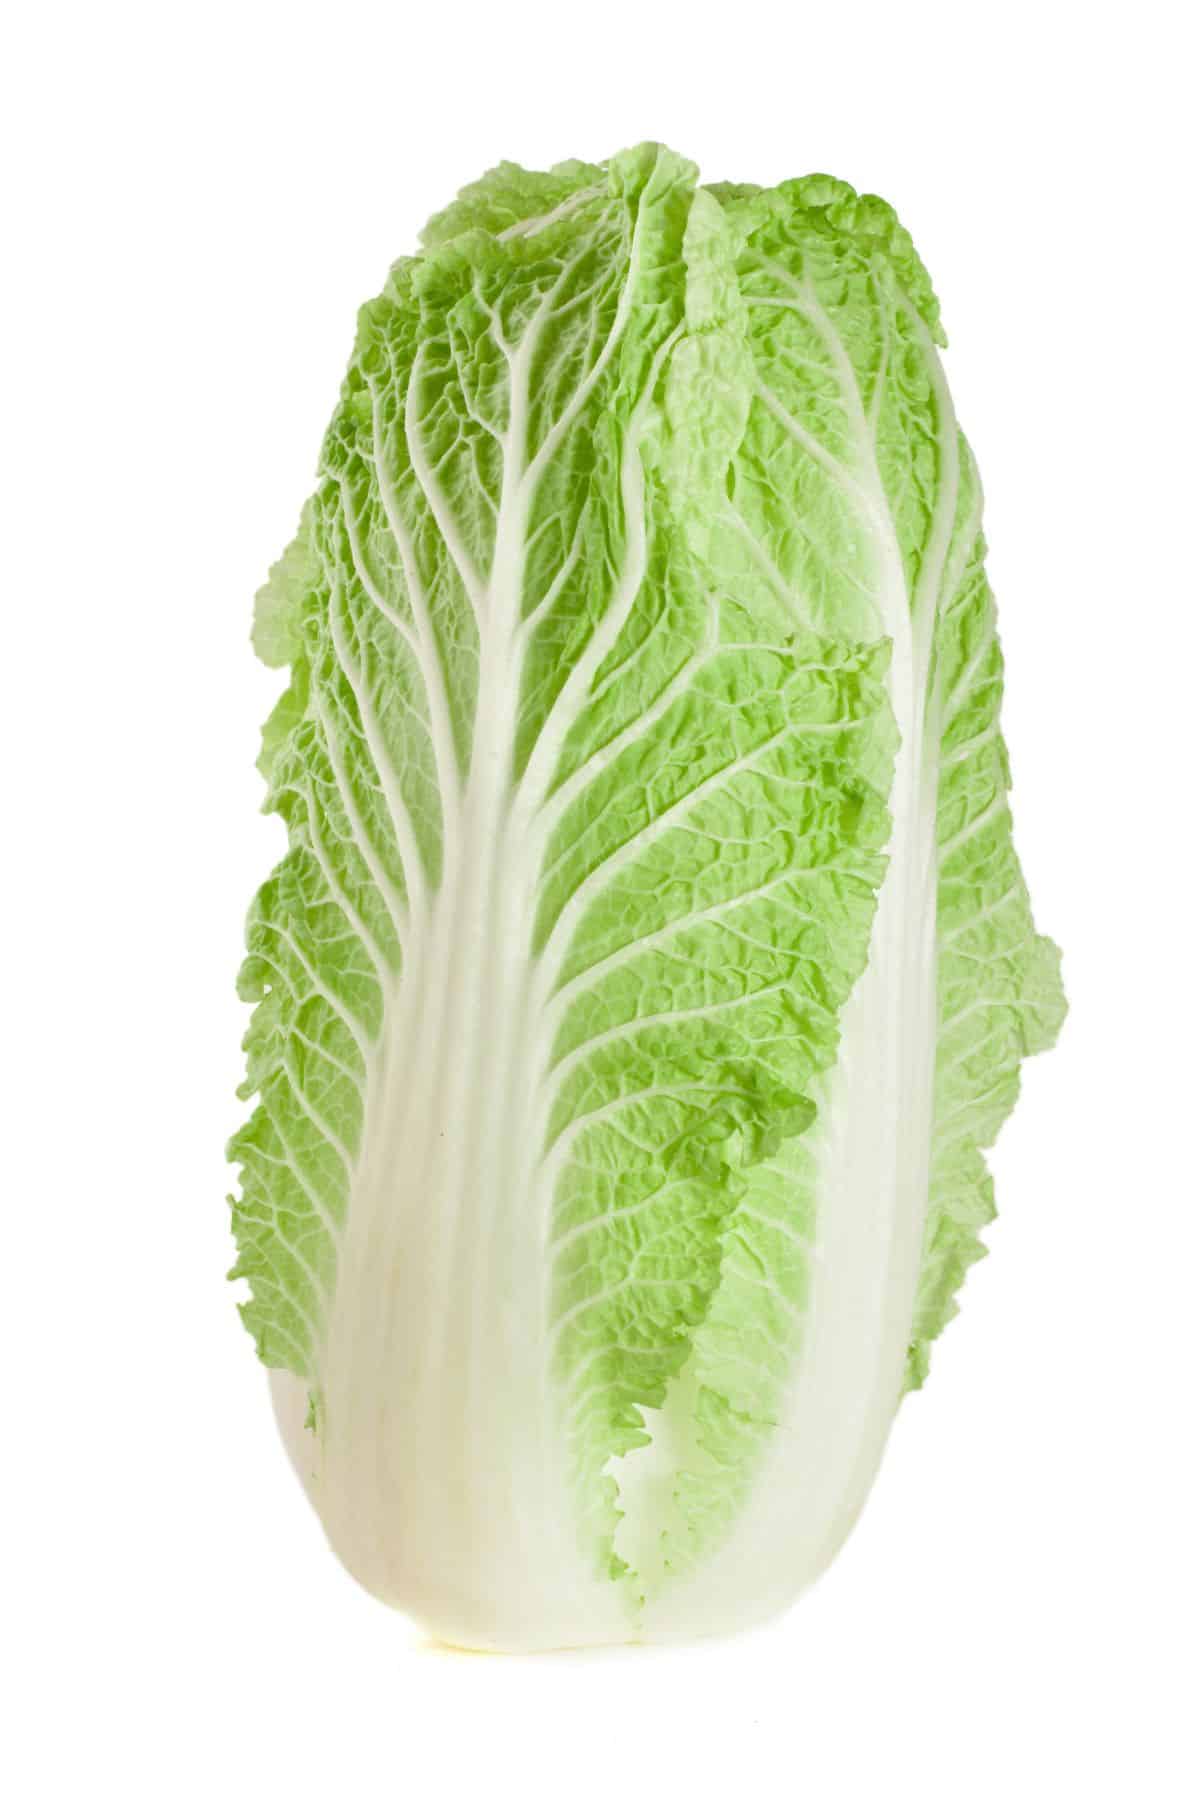 Head of napa cabbage on white background.